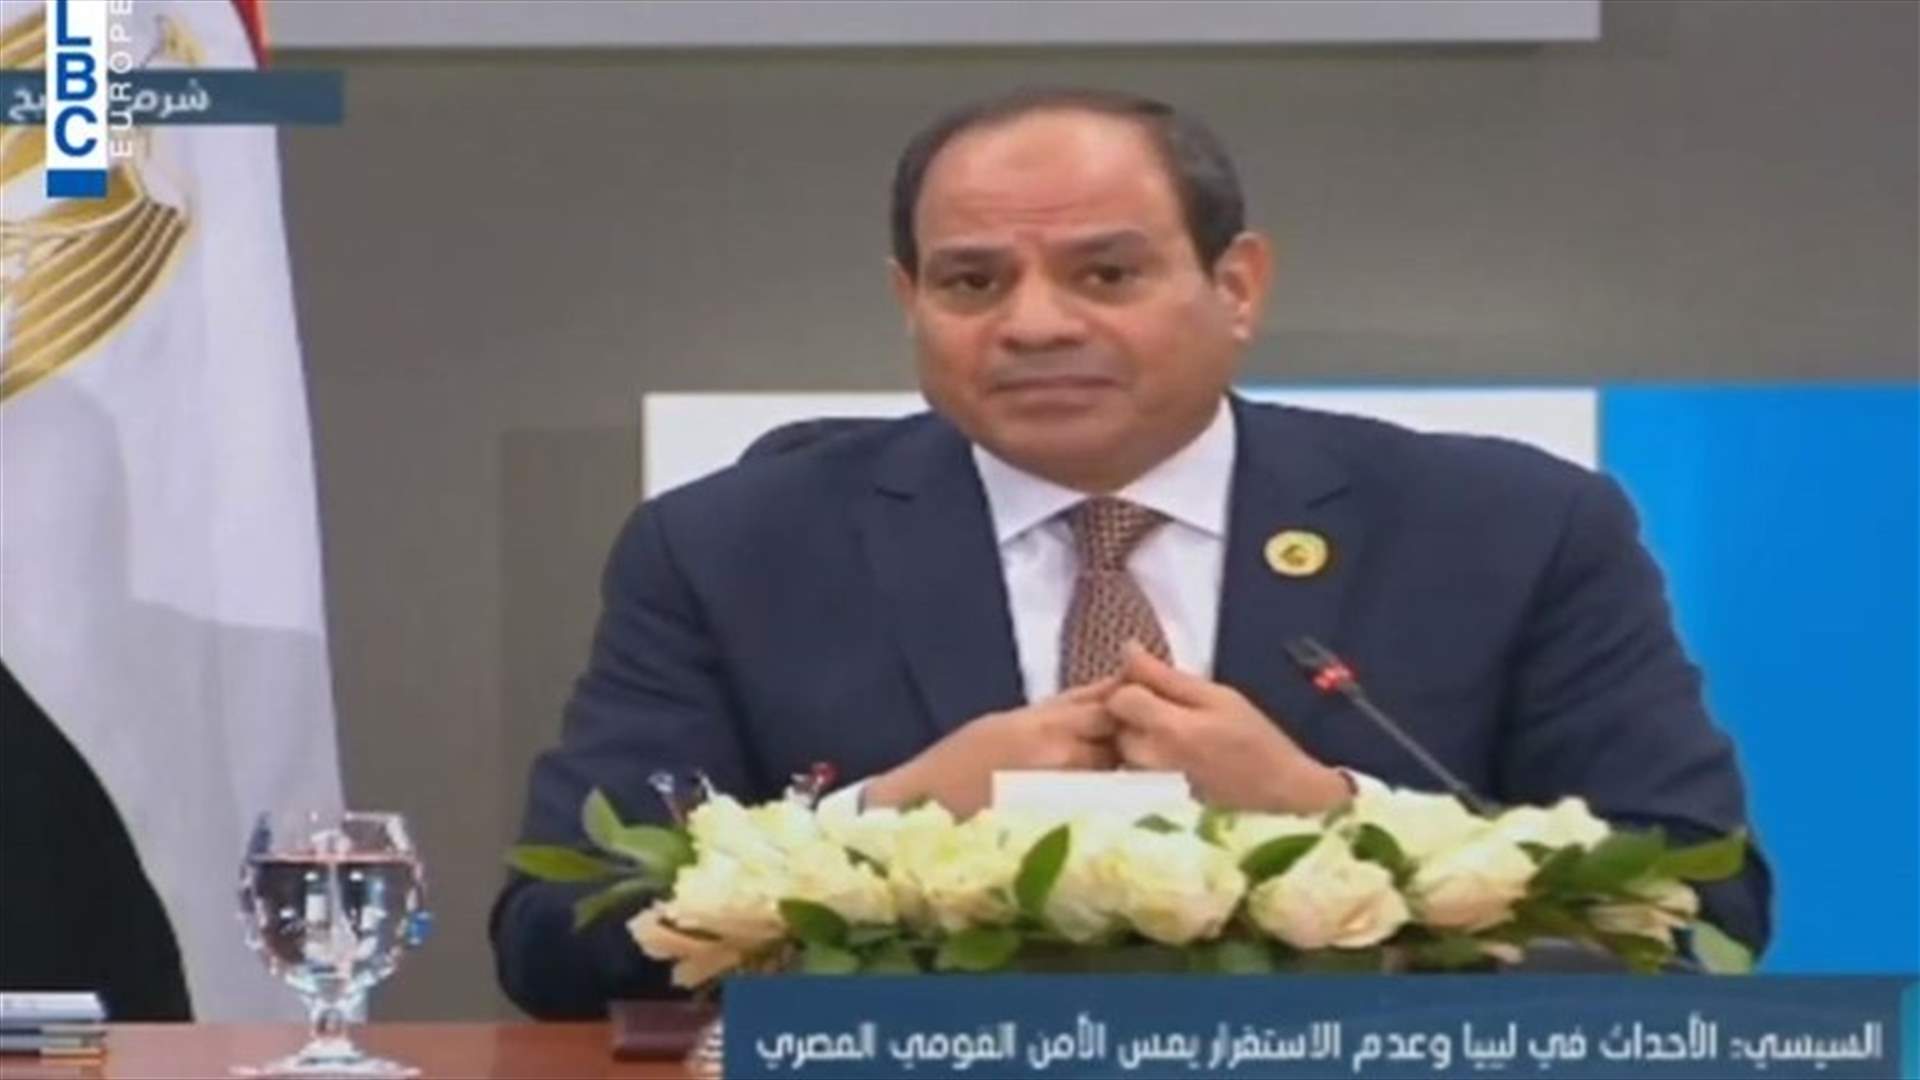 Egypt’s Sisi comments on events taking place in Lebanon (Video)